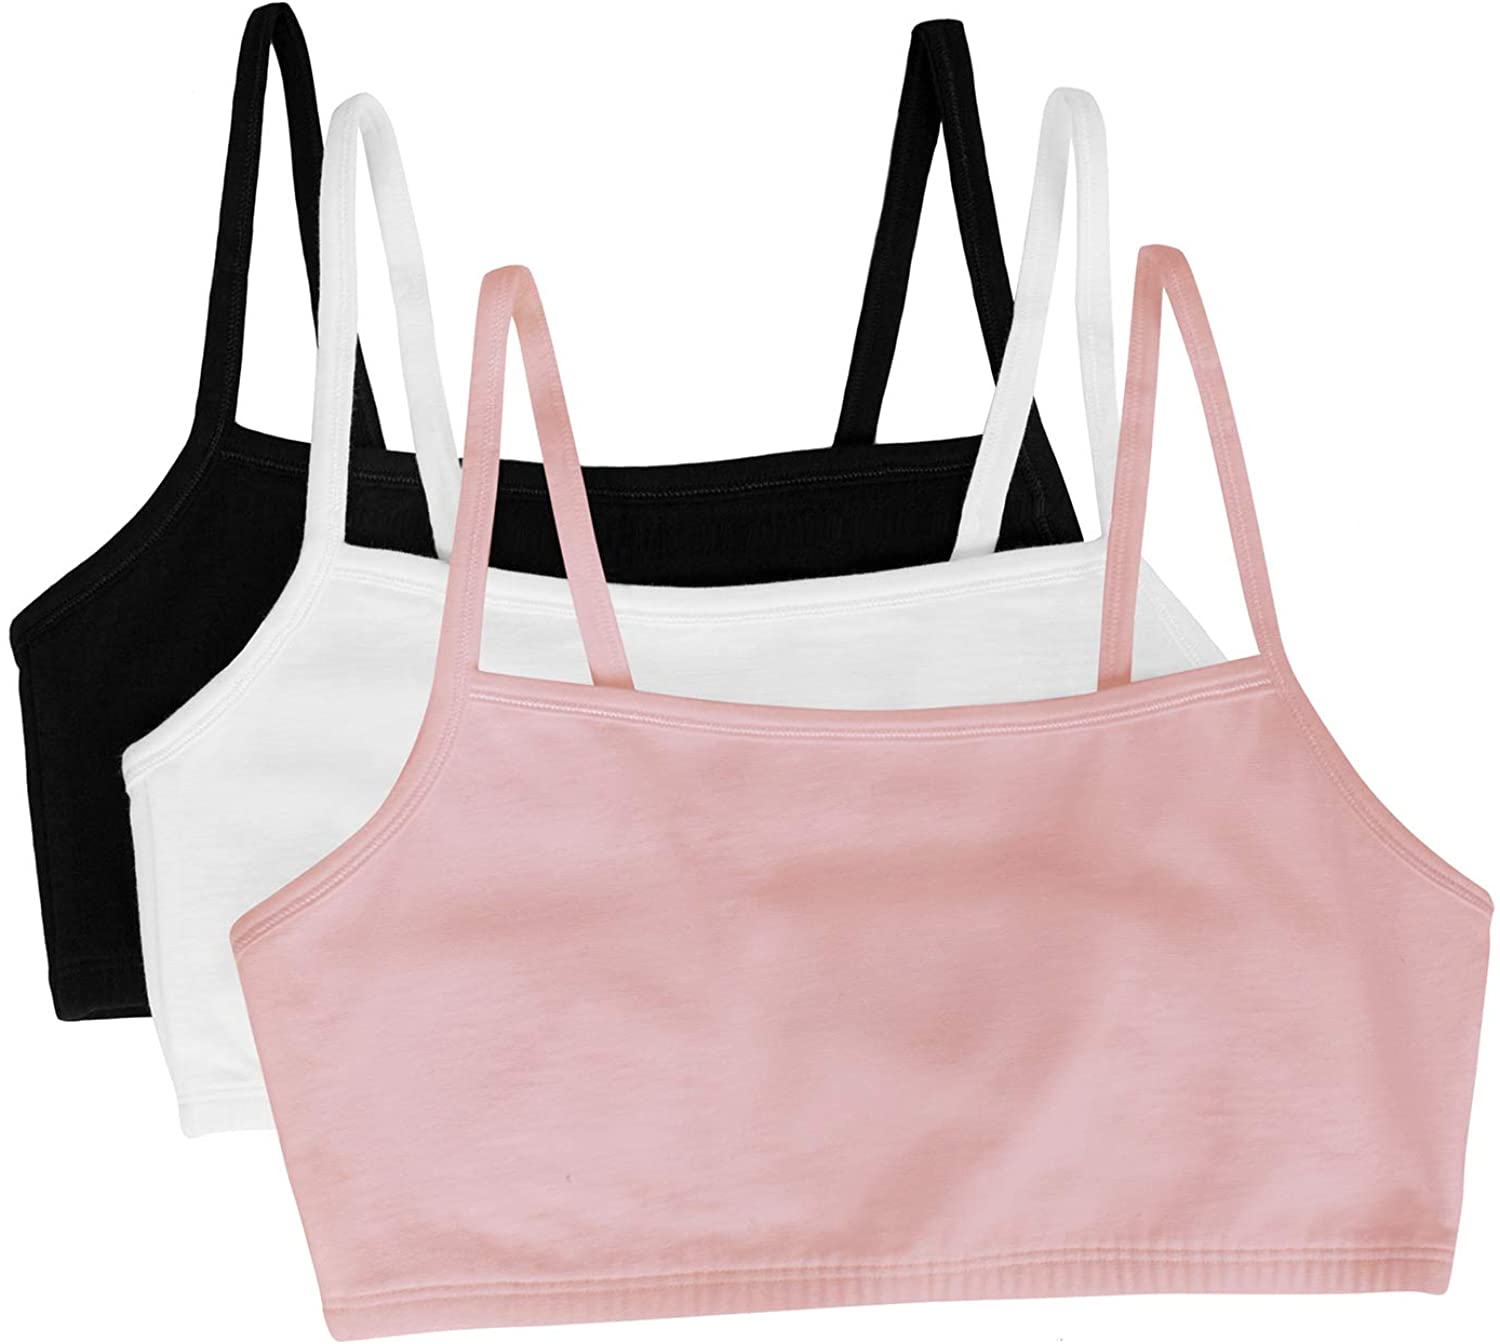 I Asked Everyone I Trust for Their Bra Recs—Here's What I Got